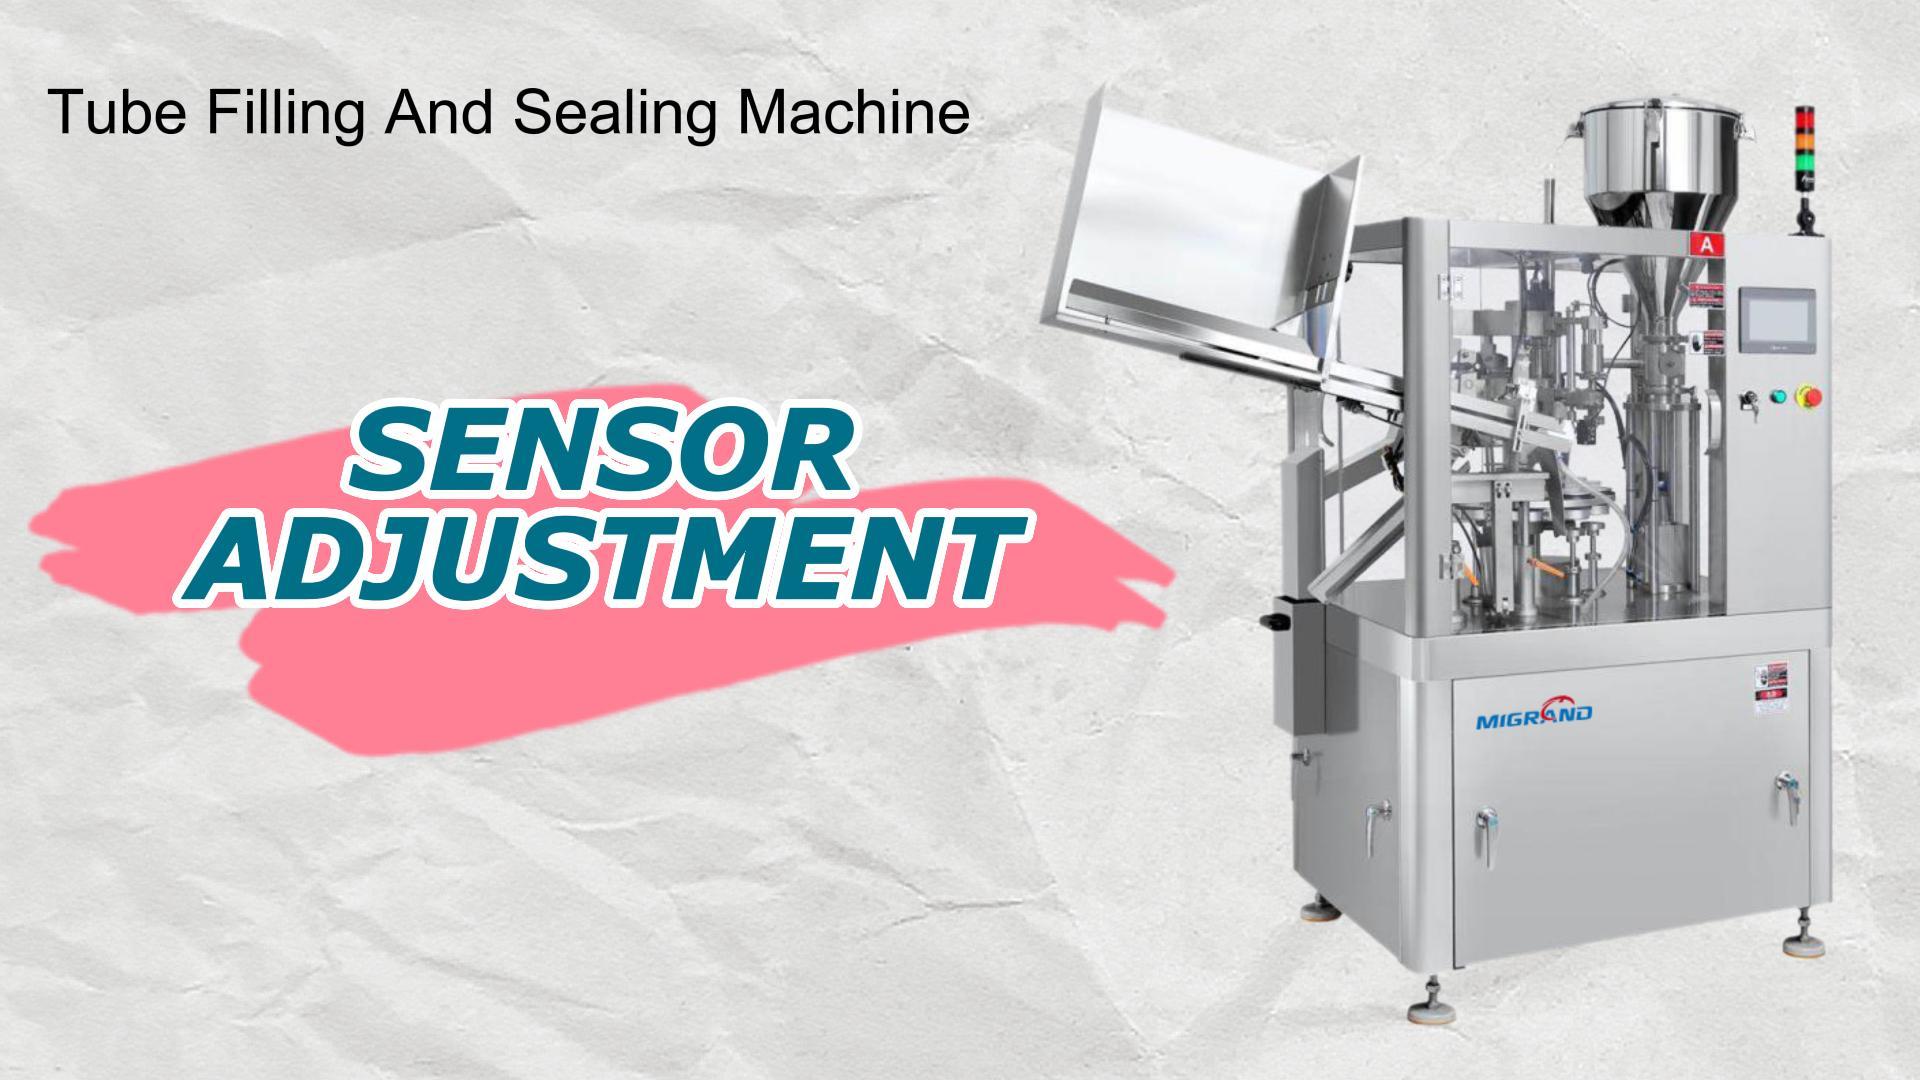 How to adjust the eye mark sensor on tube filling and sealing machine